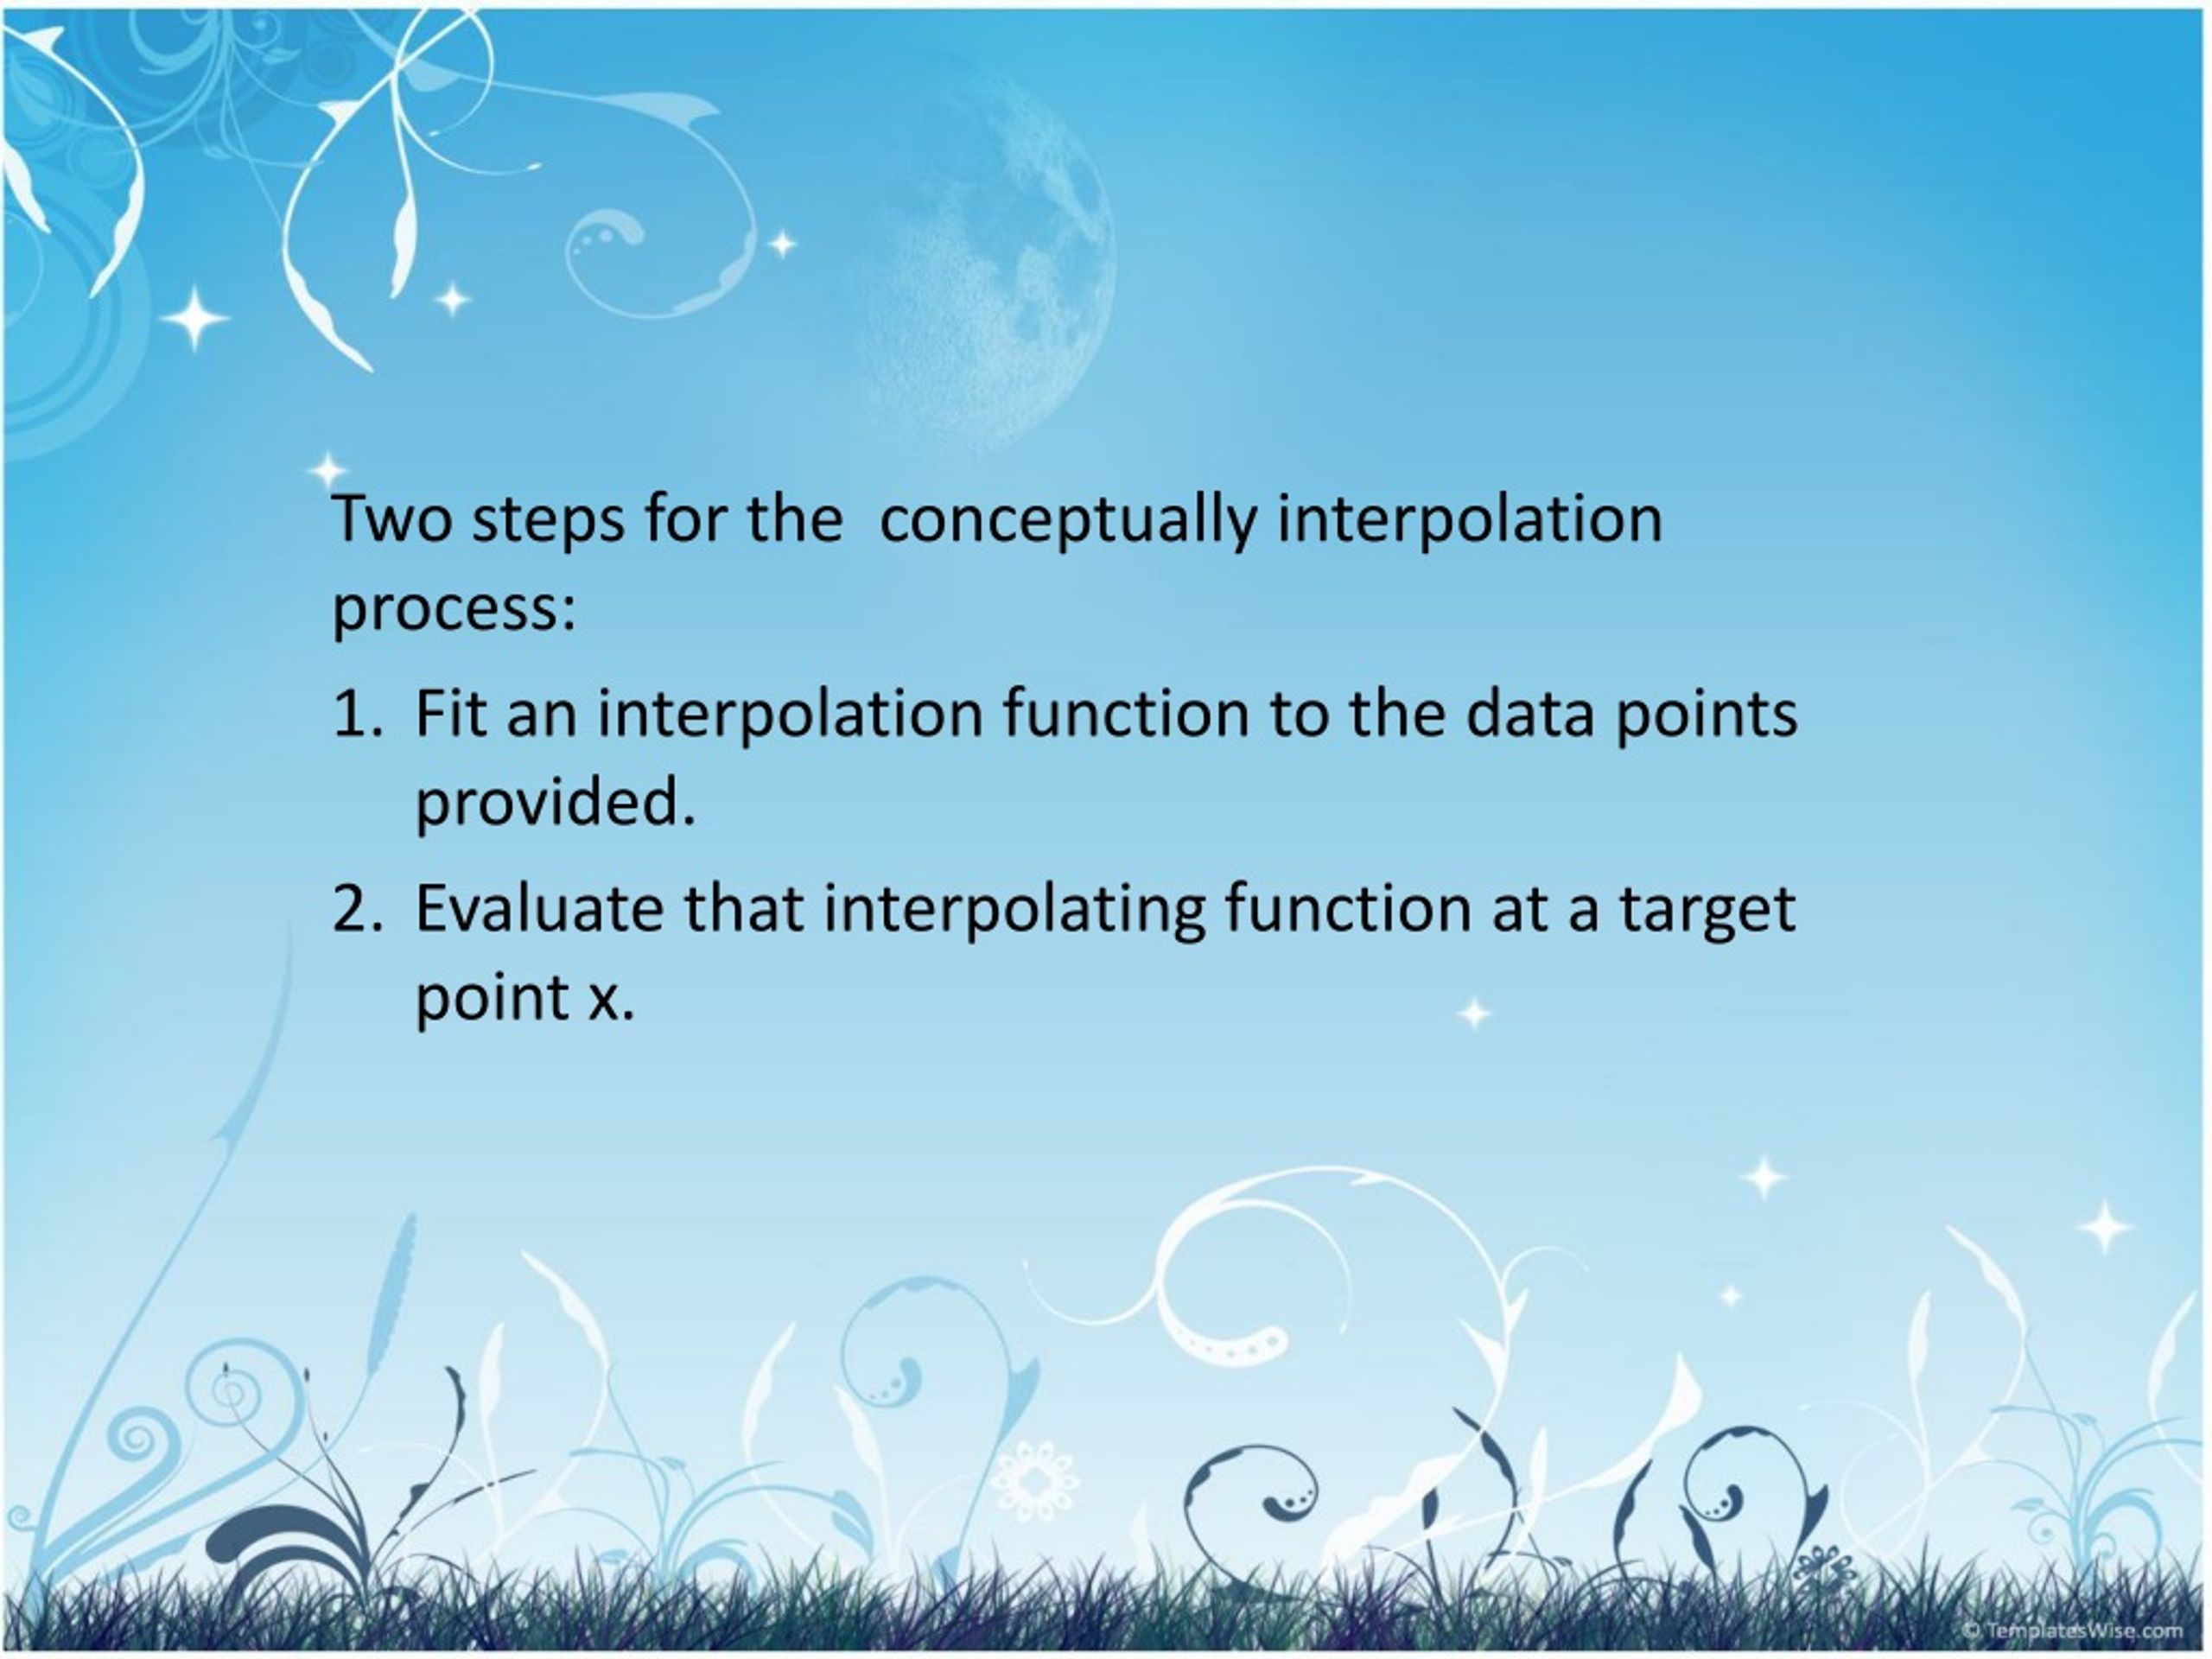 Ppt Chapter 3 Interpolation And Extrapolation Powerpoint Presentation Id8765539 1894